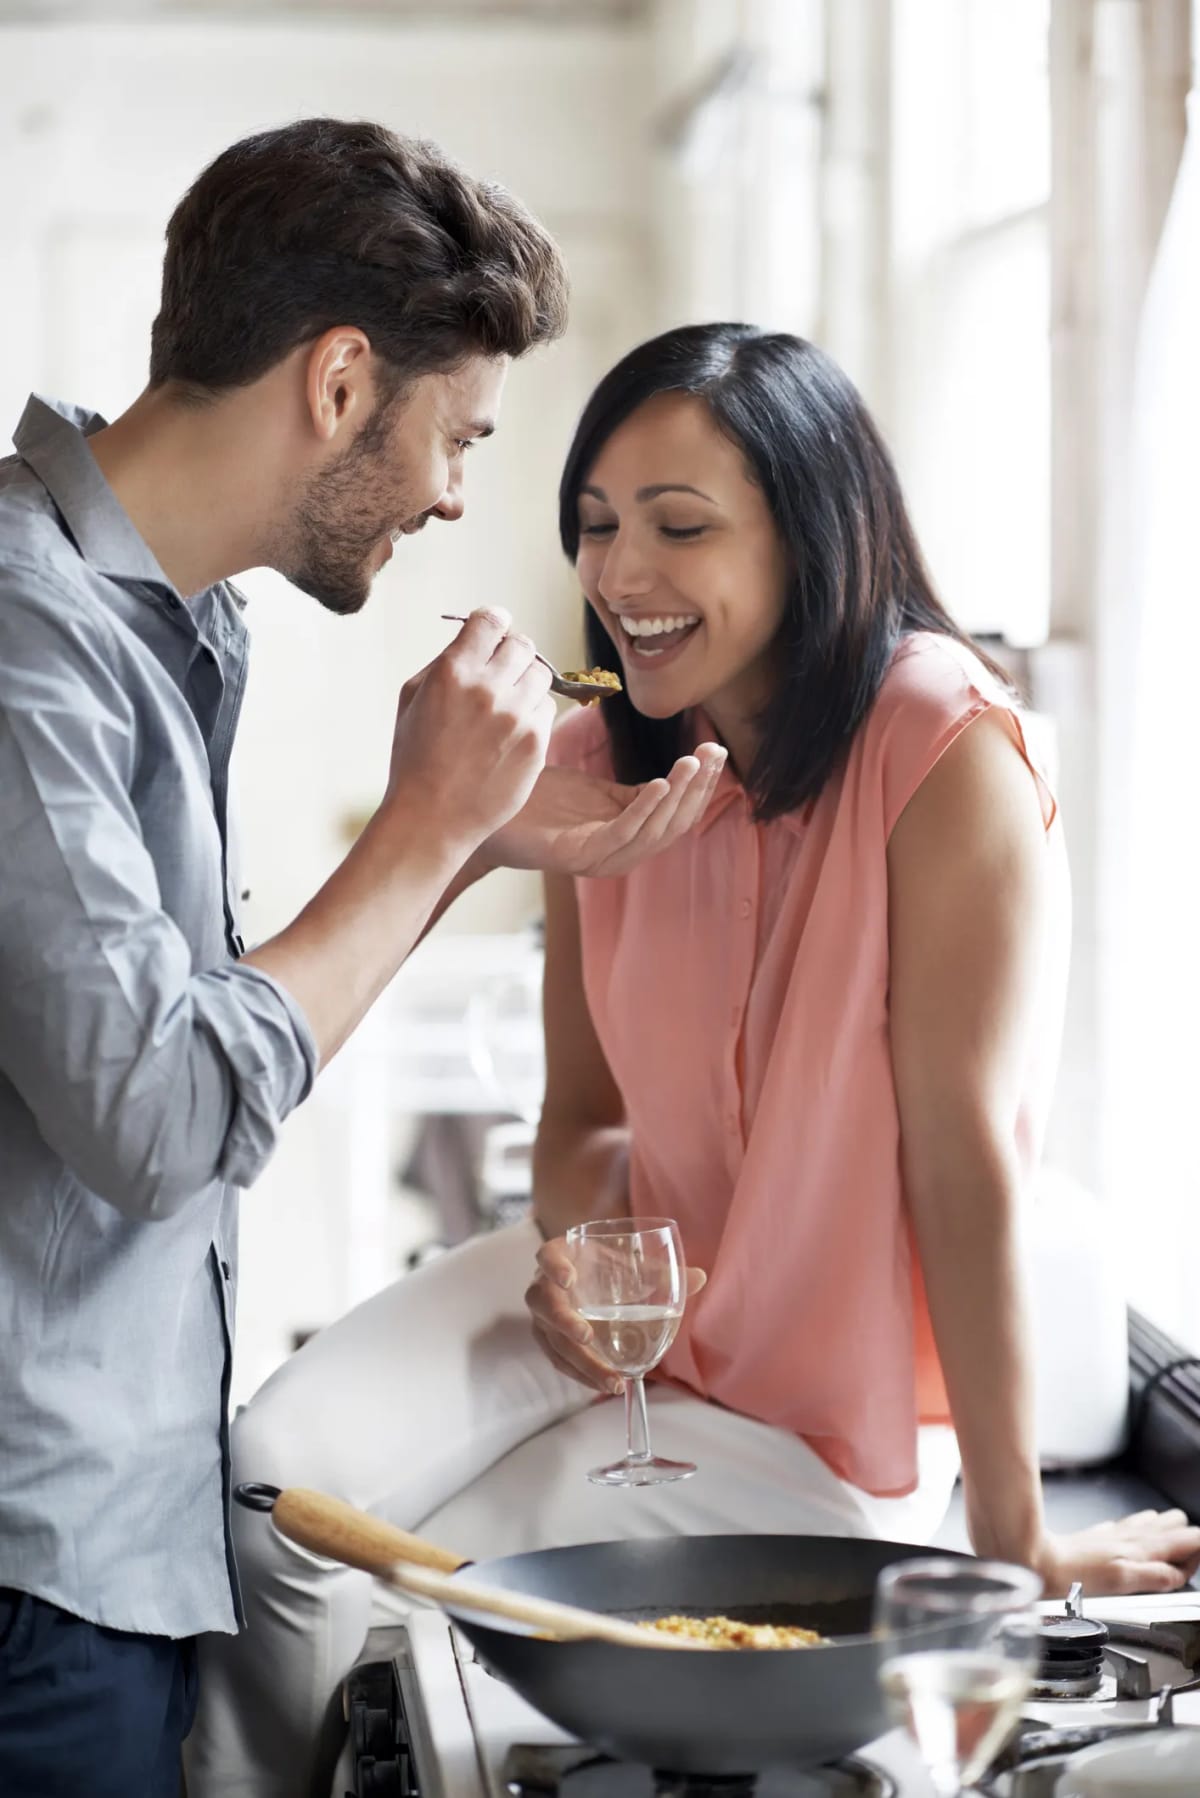 A man feeding a spoonful of food to a smiling woman